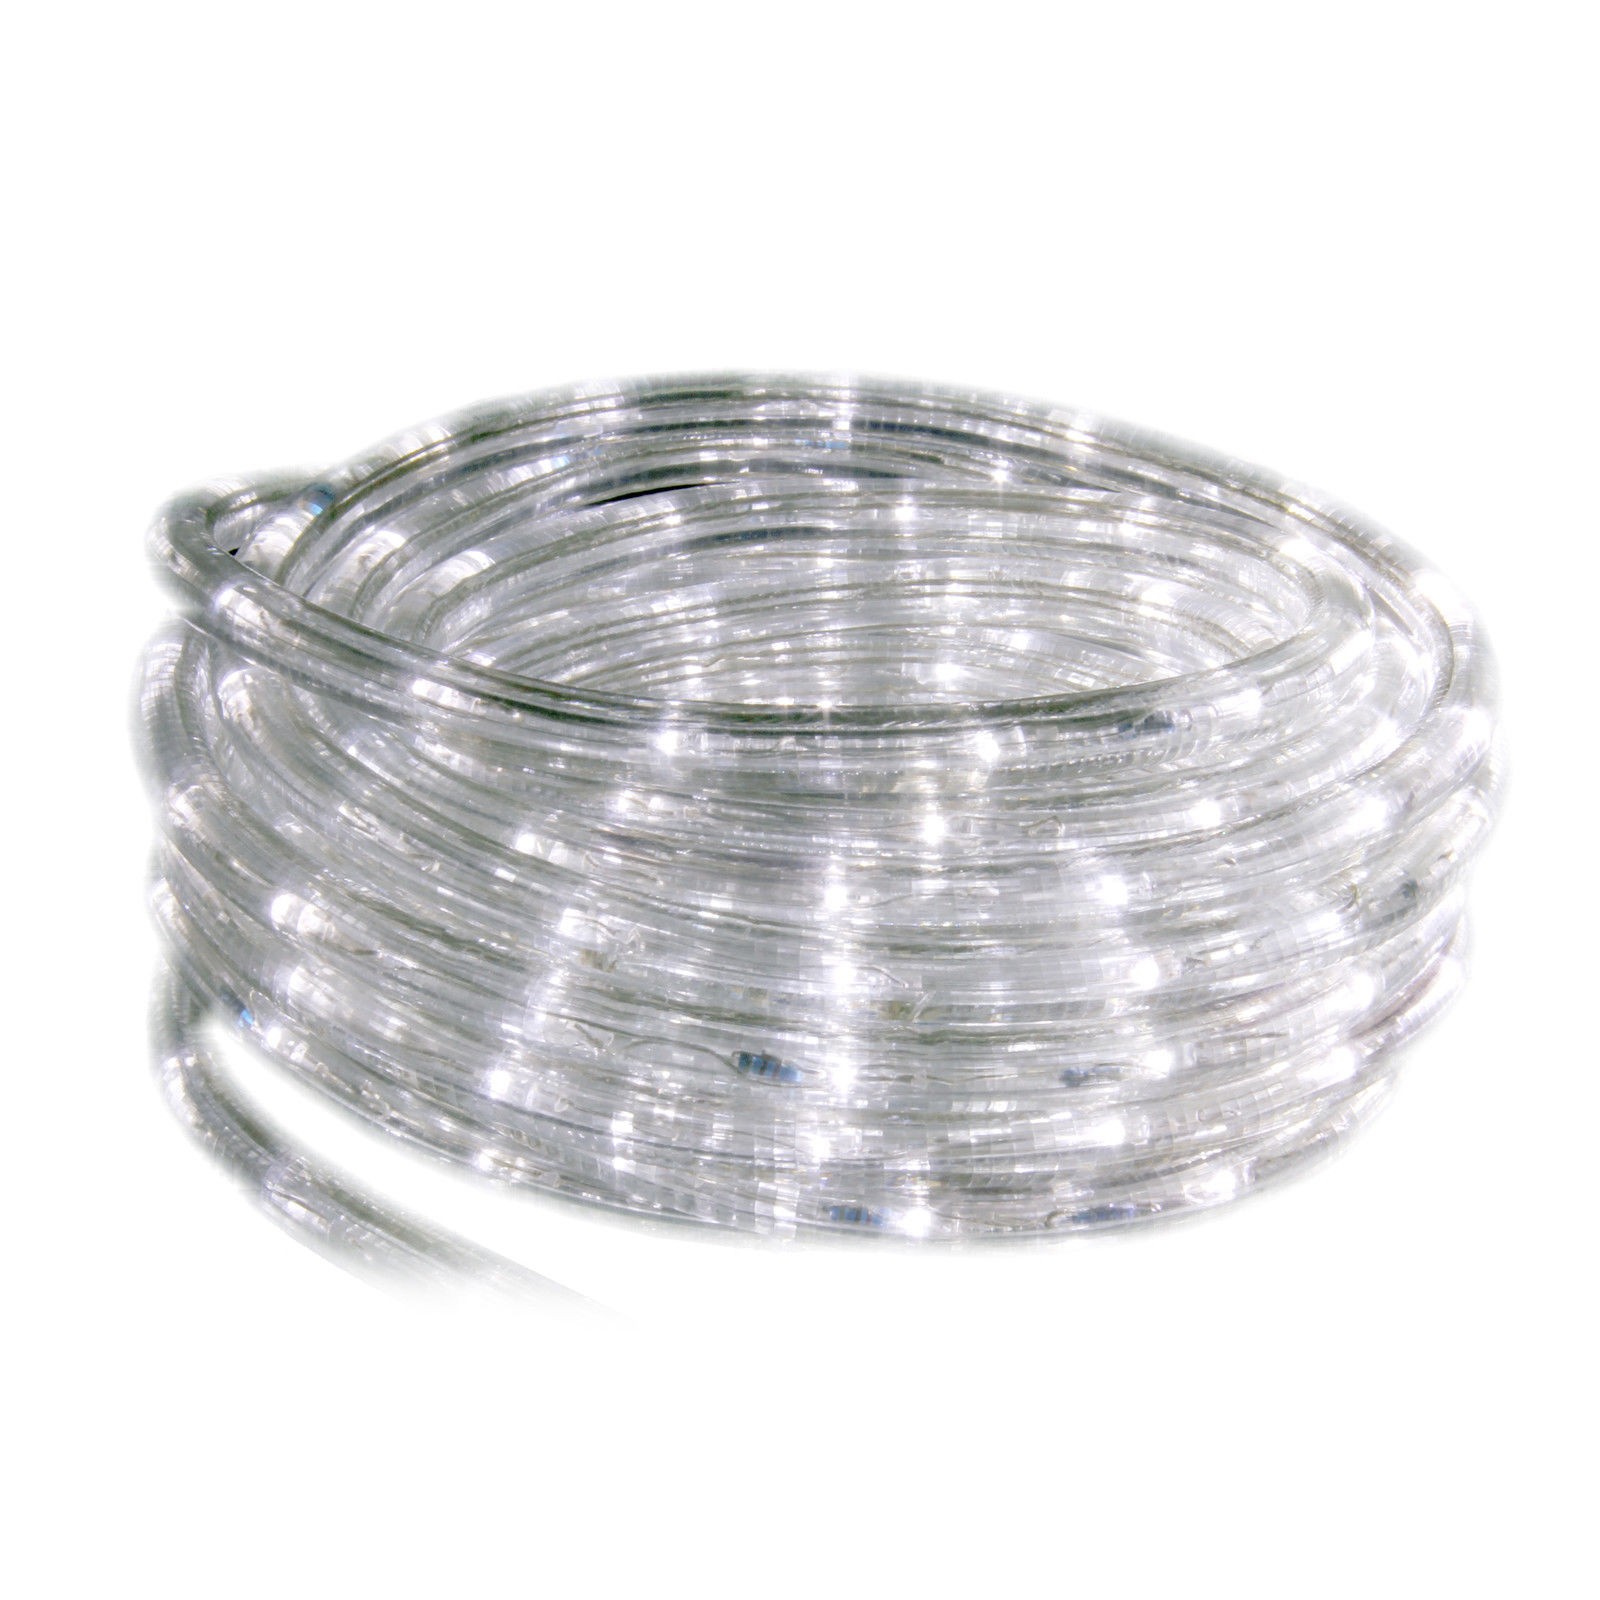 20m 1,50€/1m LED LICHTSCHLAUCH IP44 WEISS 480LED`s 8 FUNKT + CONT. EEK A